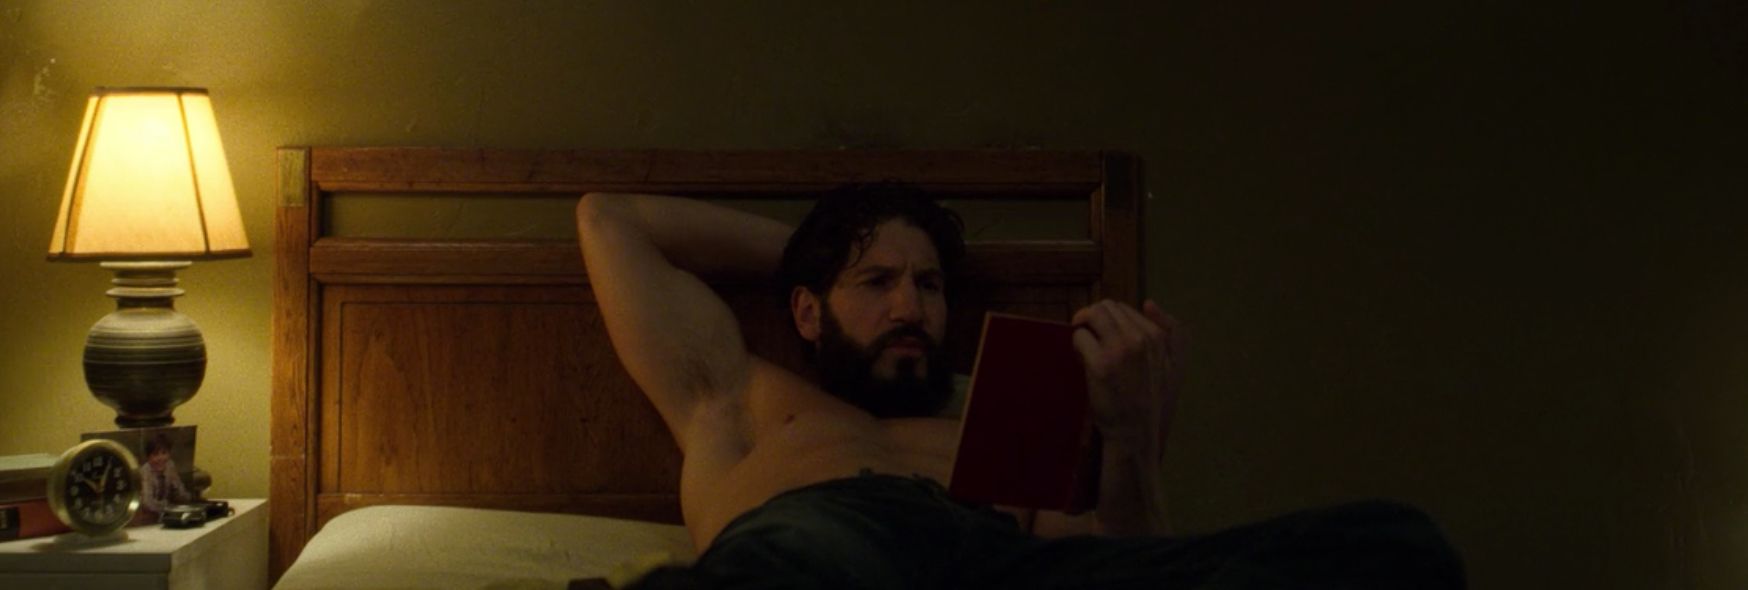 Frank Castle Reading in The Punisher Episode 1